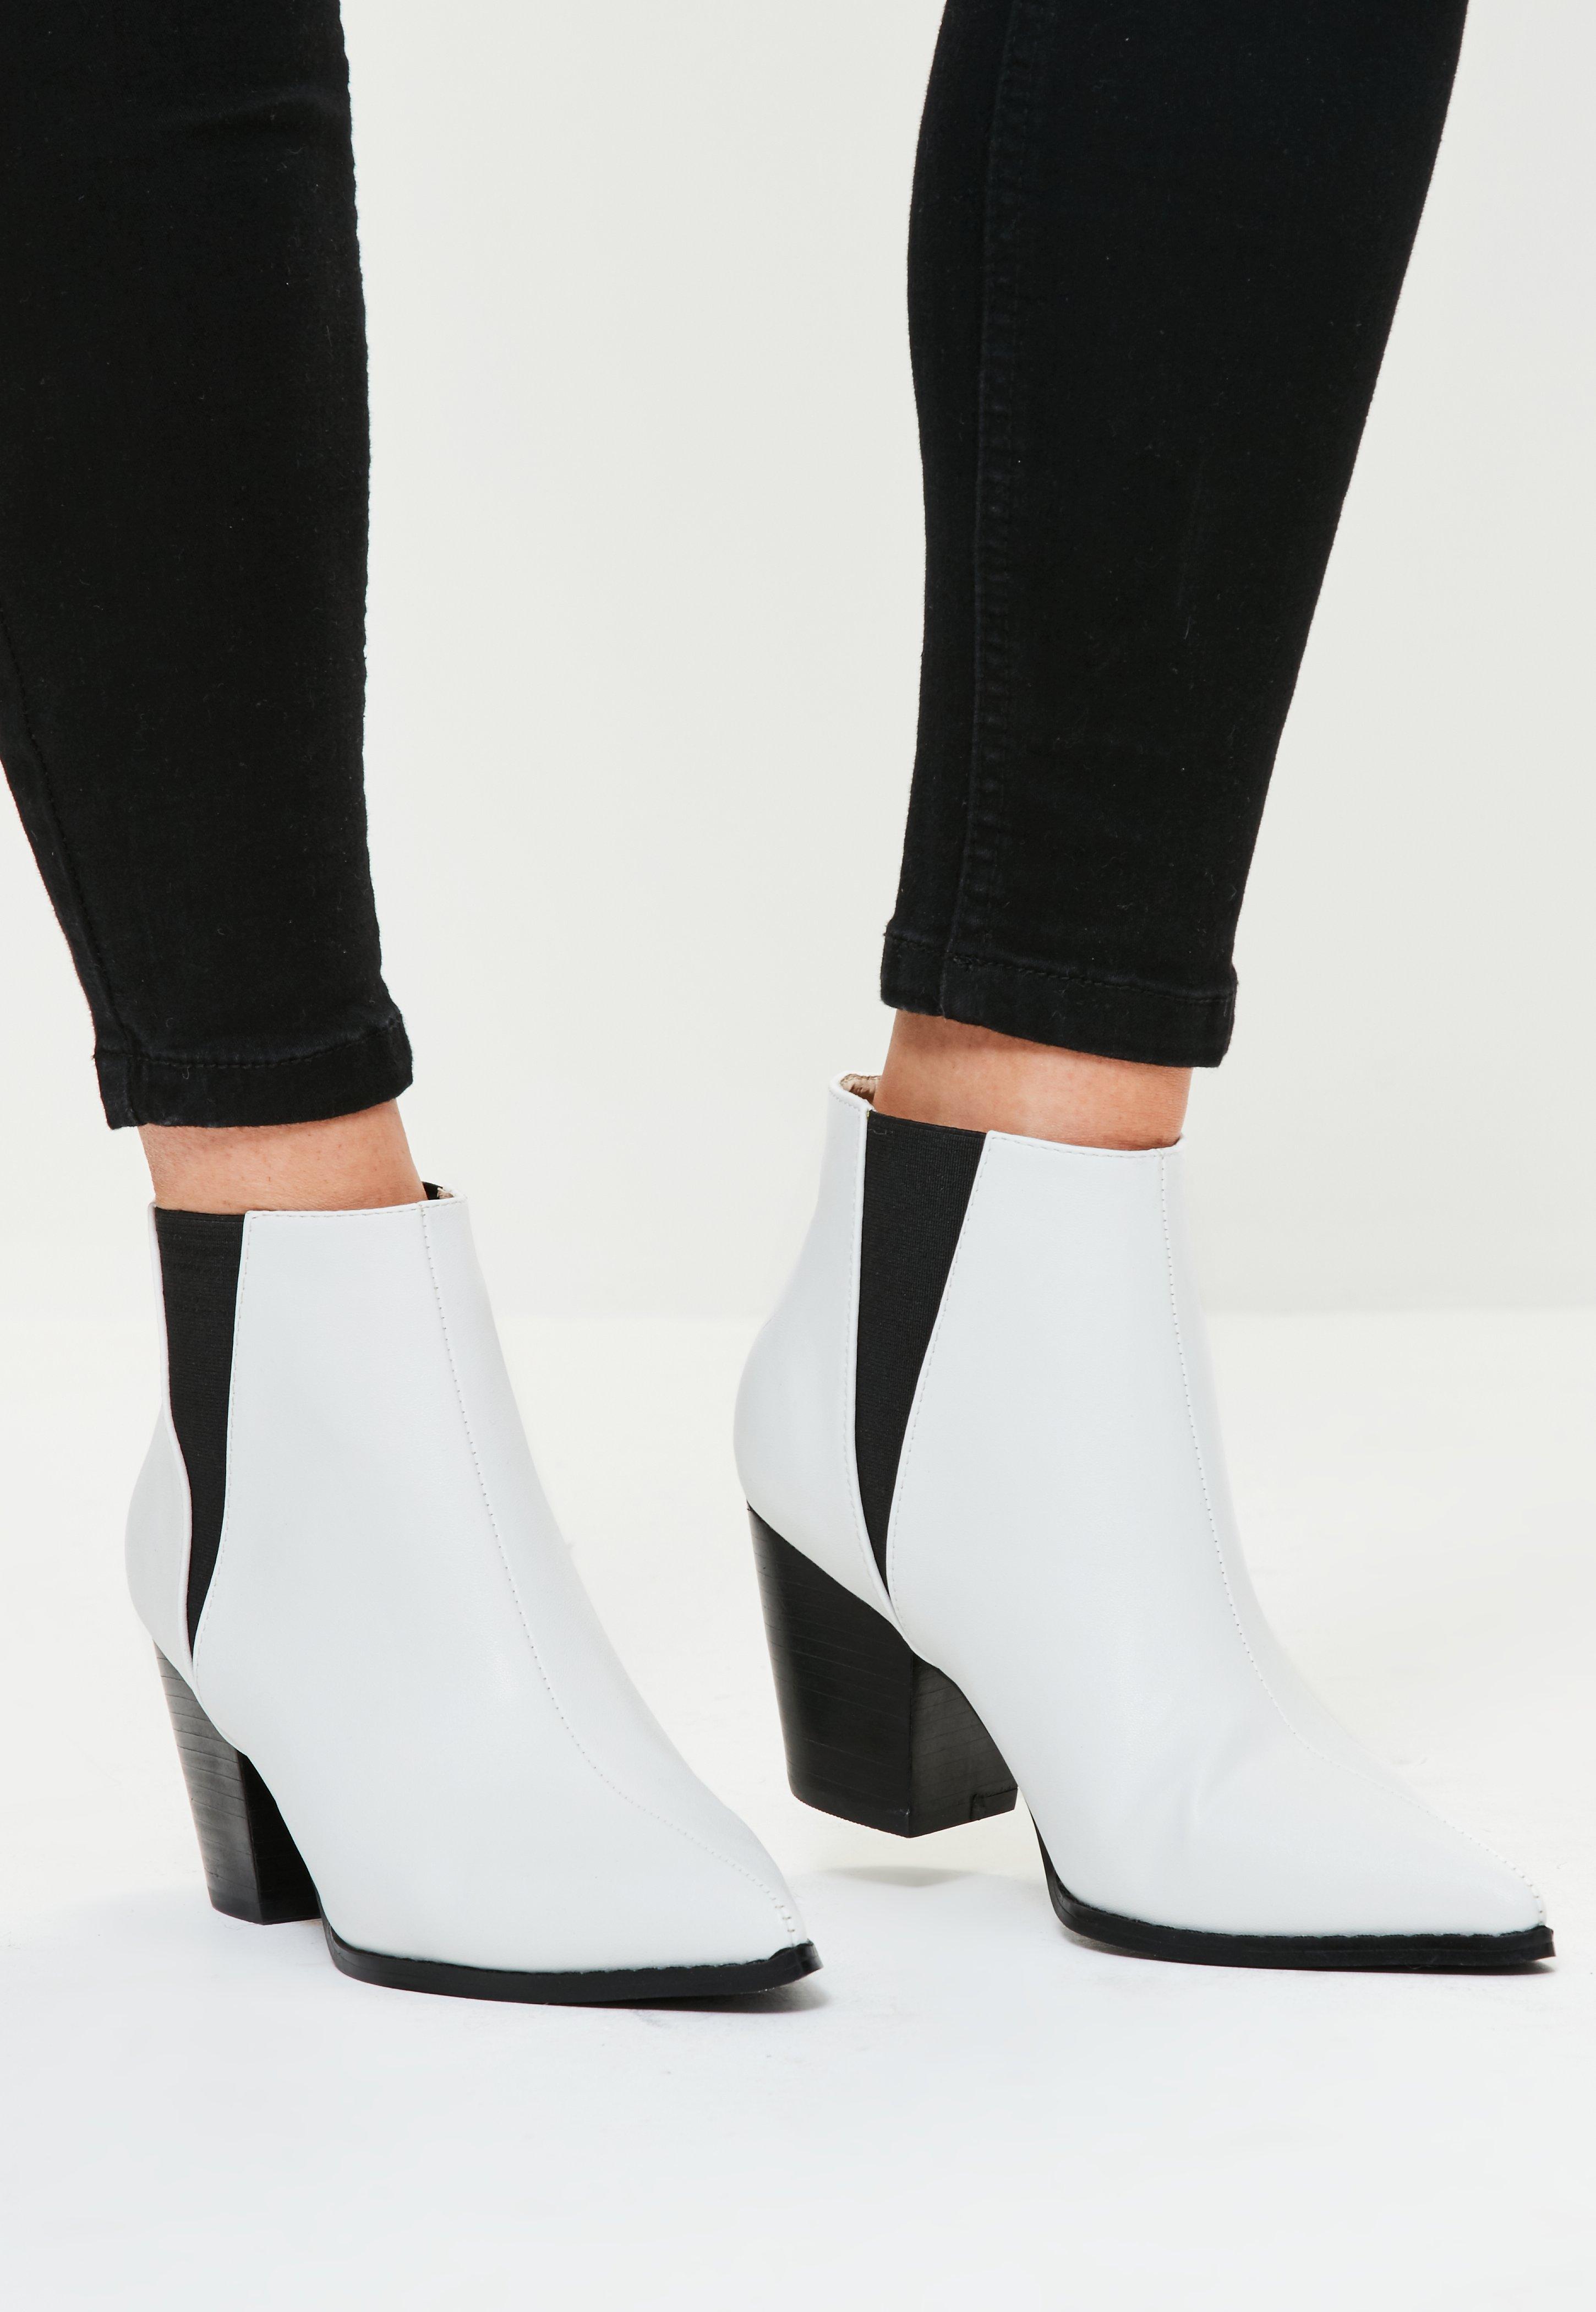 missguided square toe boot in white faux croc